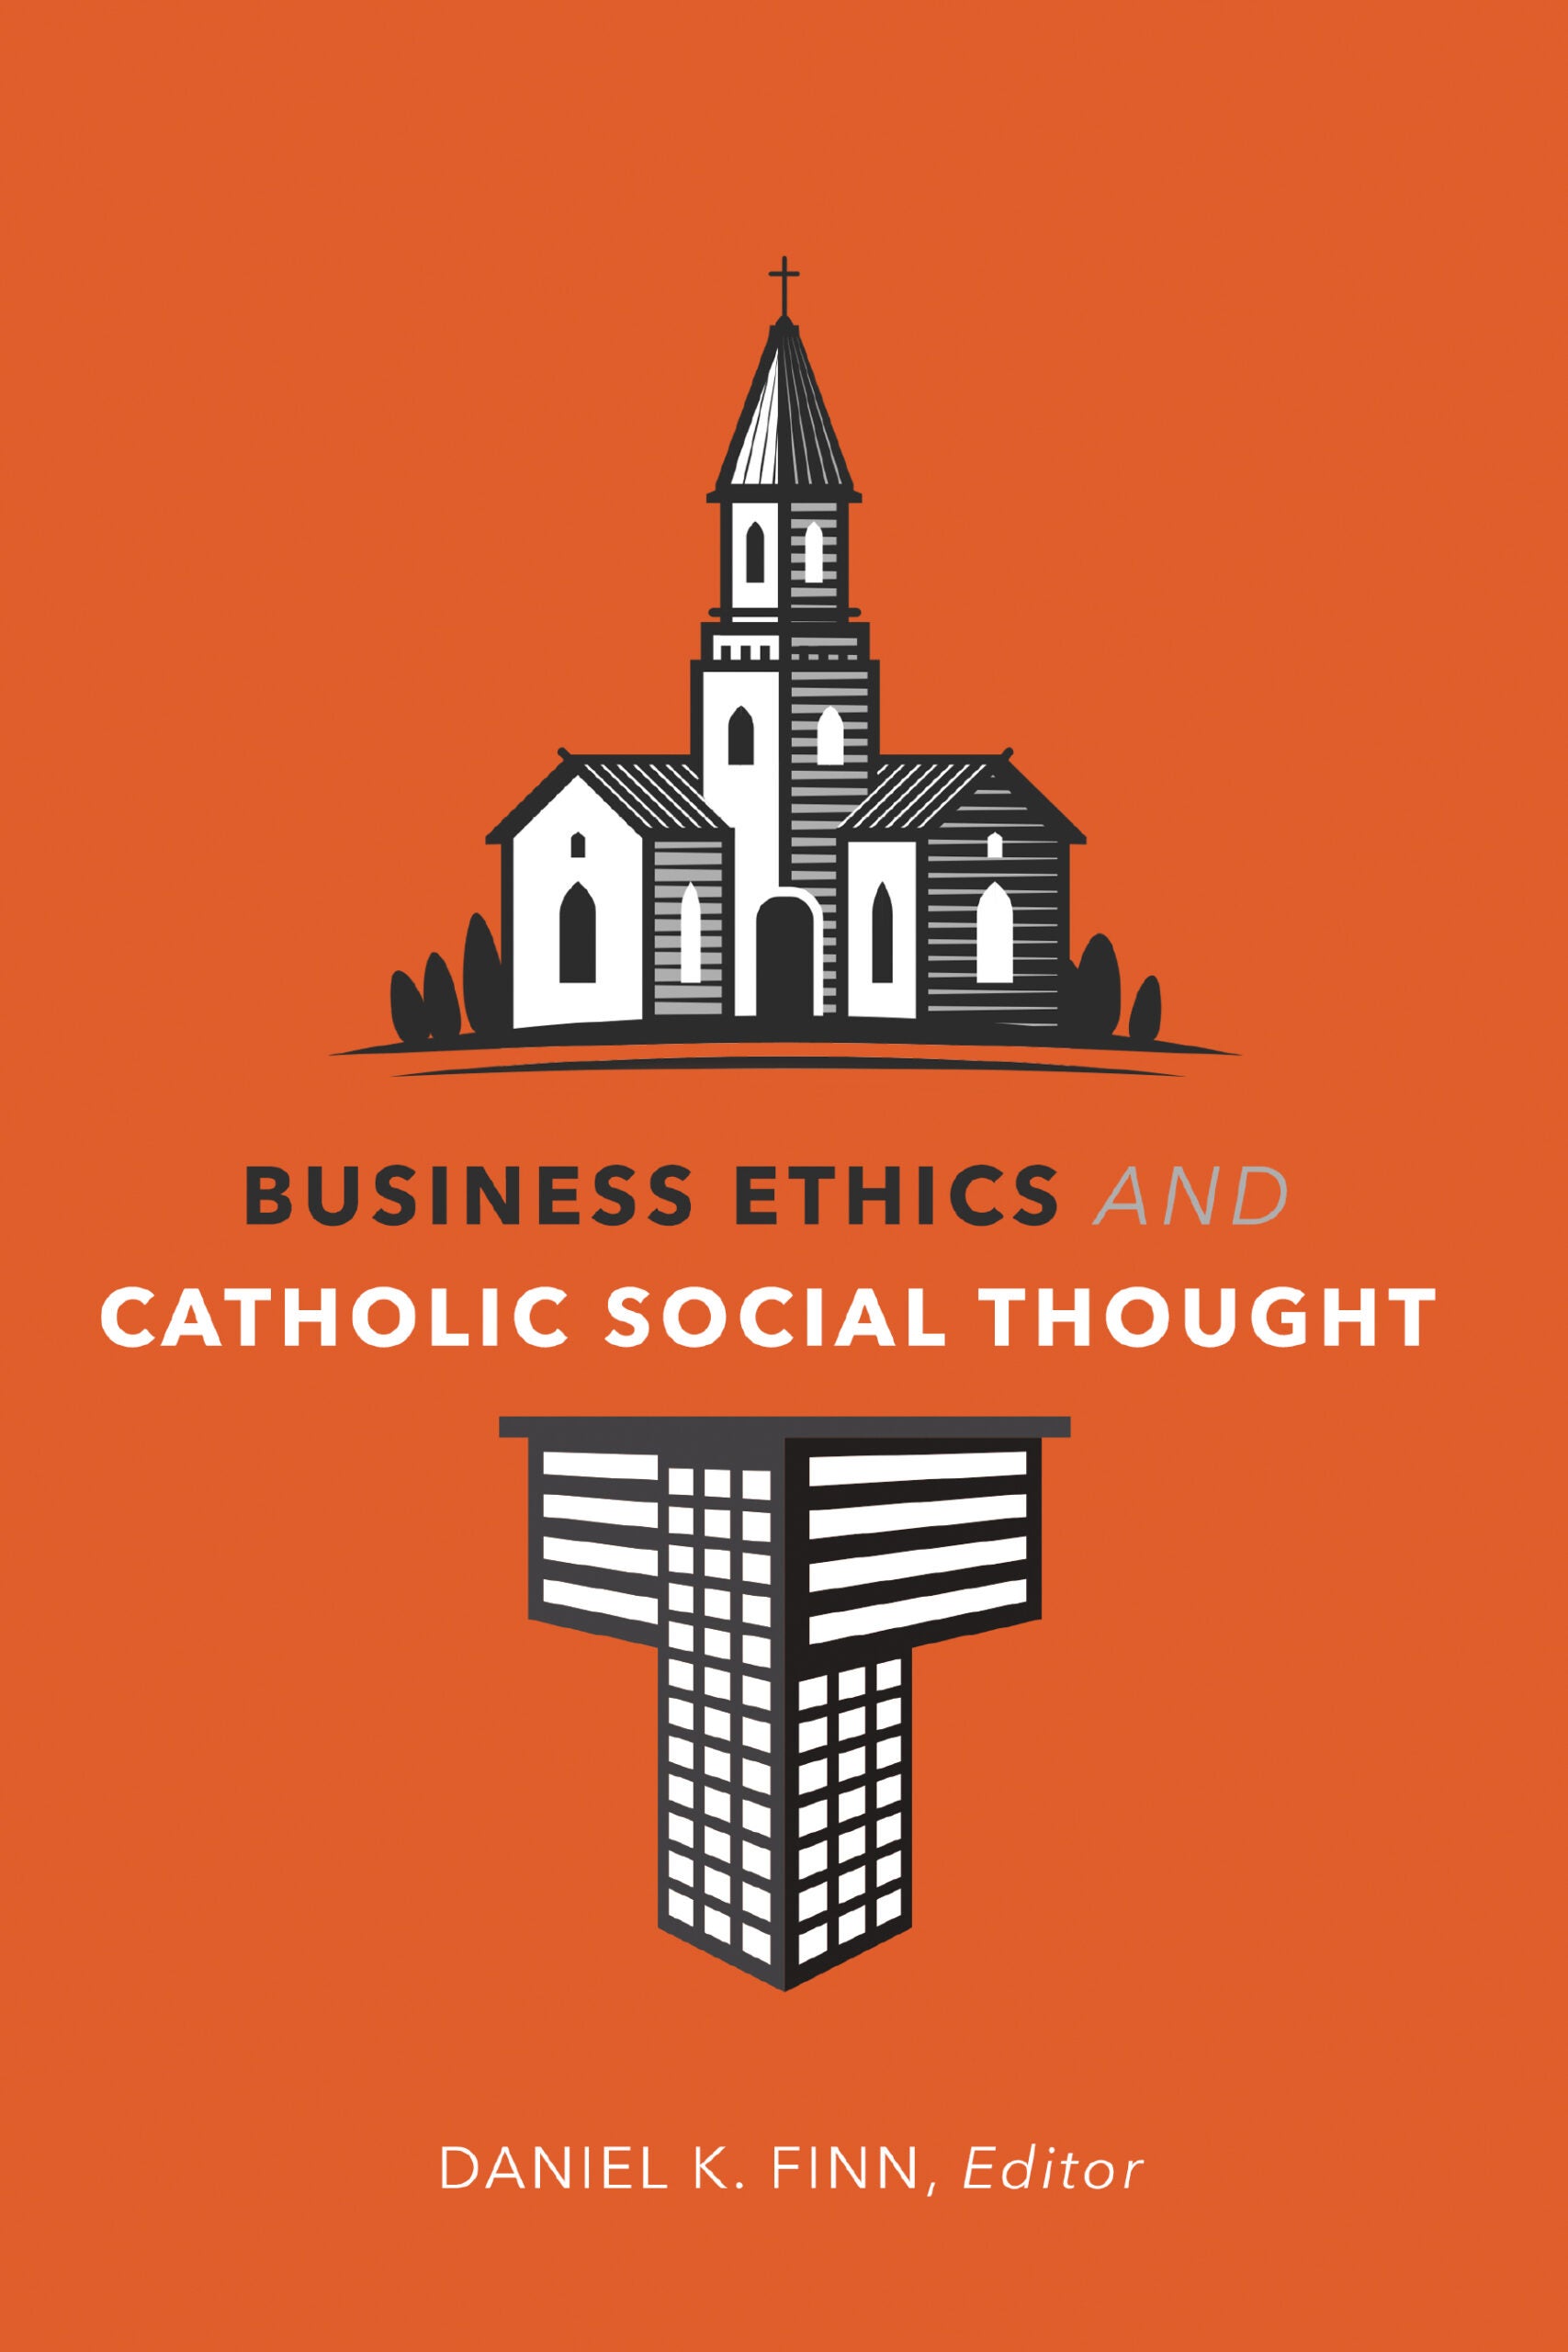 A photo of the cover of the IACS book Business Ethics and Catholic Social Thought